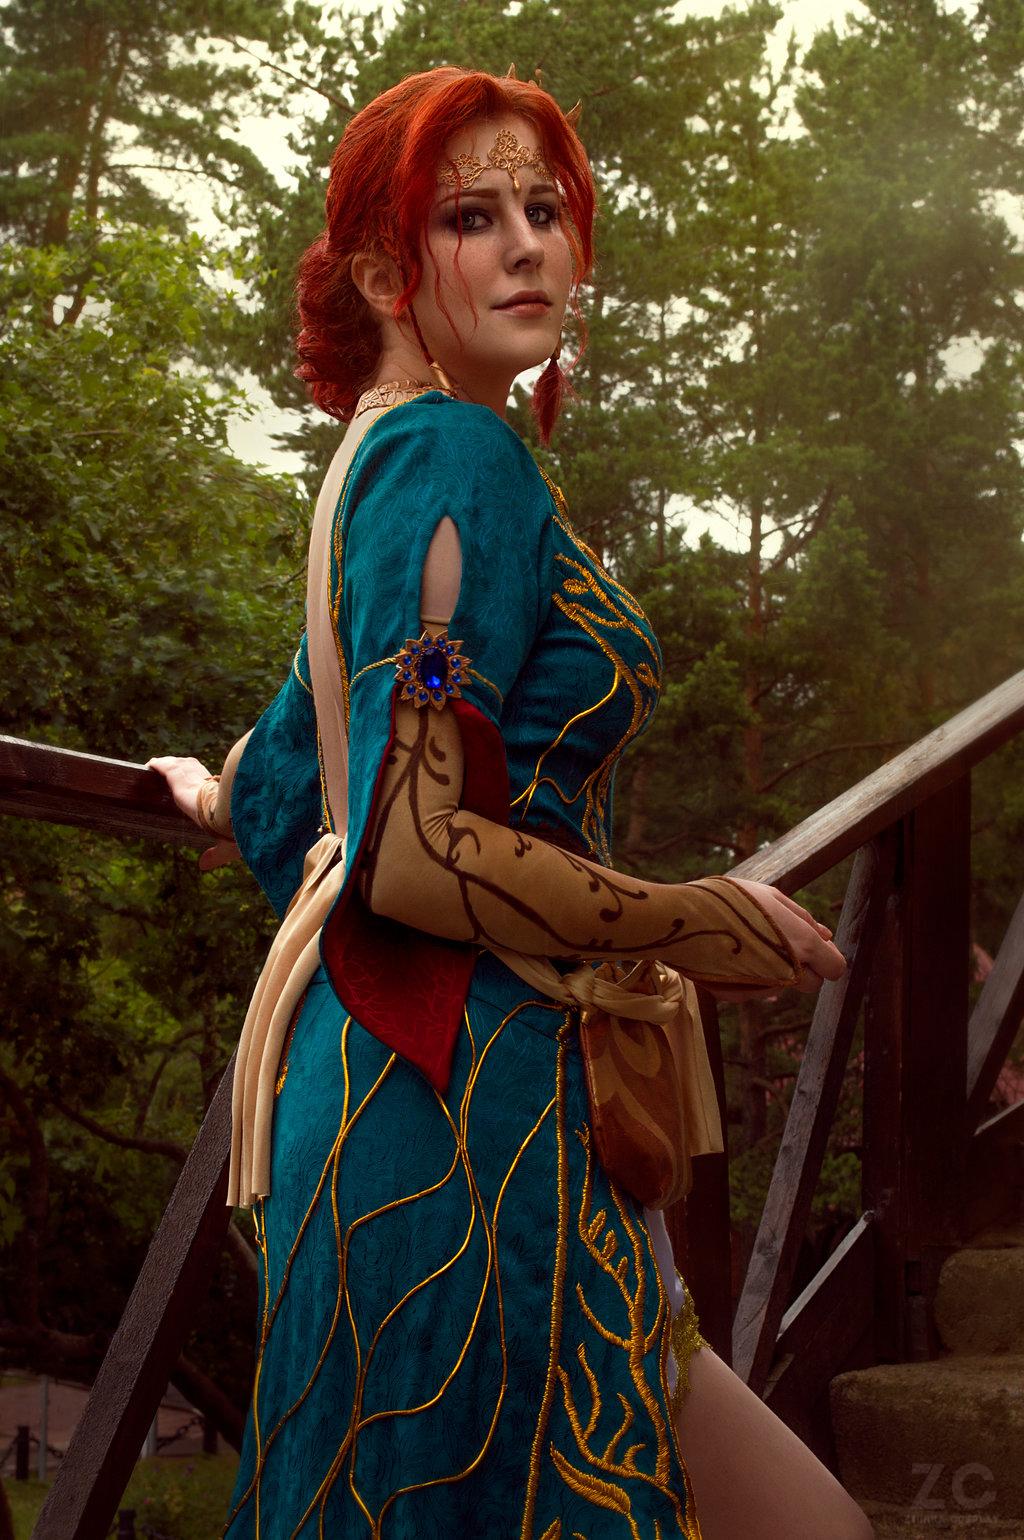 60+ Hot Pictures Of Triss Merigold From The Witcher Series Are Delight For Fans 392